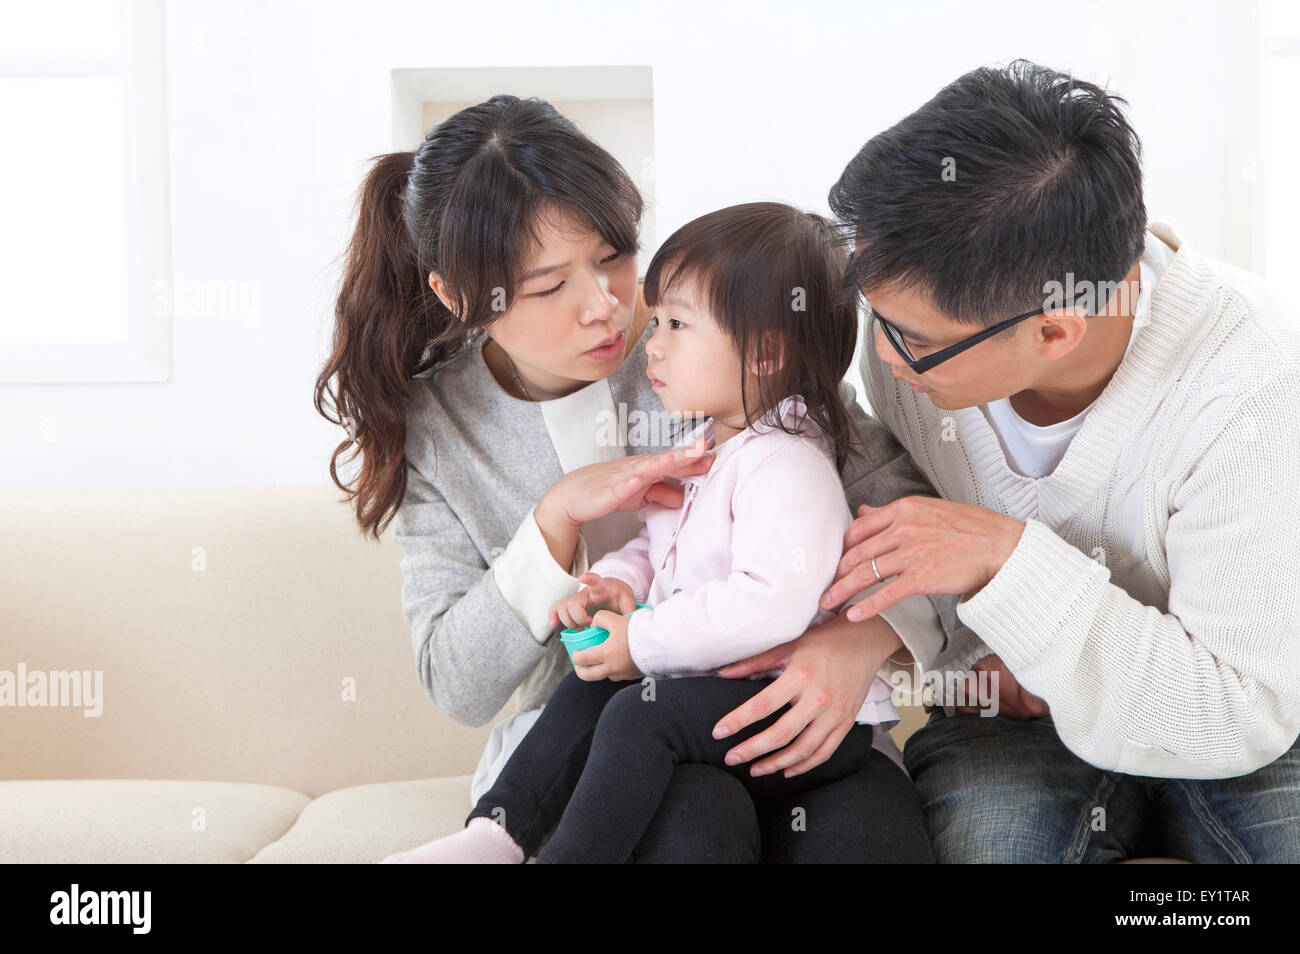 Father and mother looking at baby girl together, Stock Photo